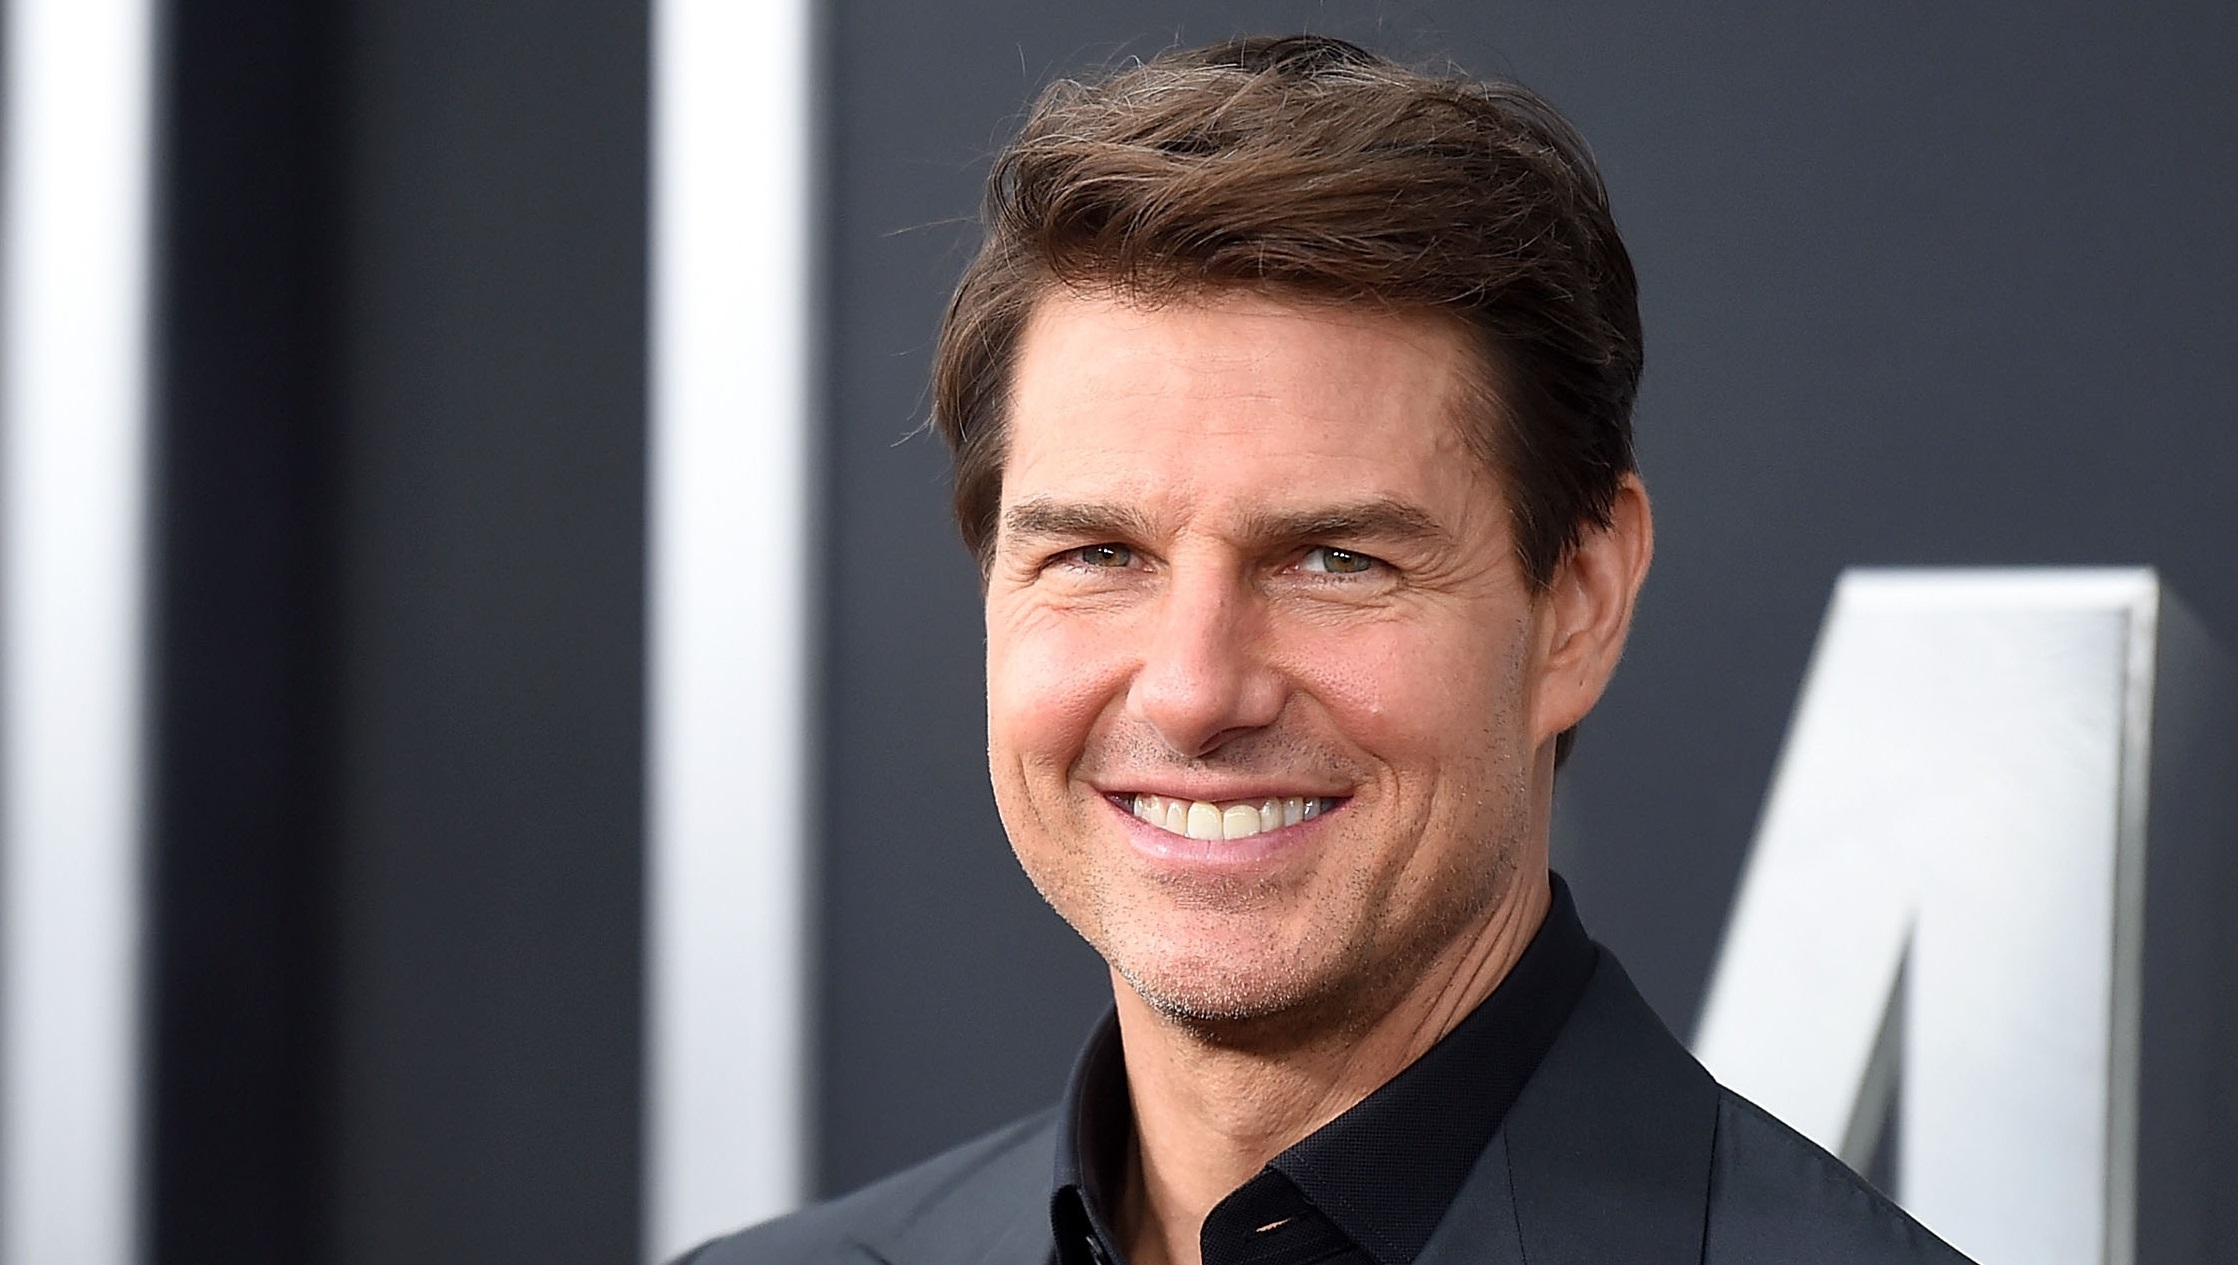 Tom Cruise / Tom Cruise Does Not Look Like This Anymore - Tom cruise is the owner of an incredible estate in telluride, colorado, but he has decided to drop it from his real estate portfolio.